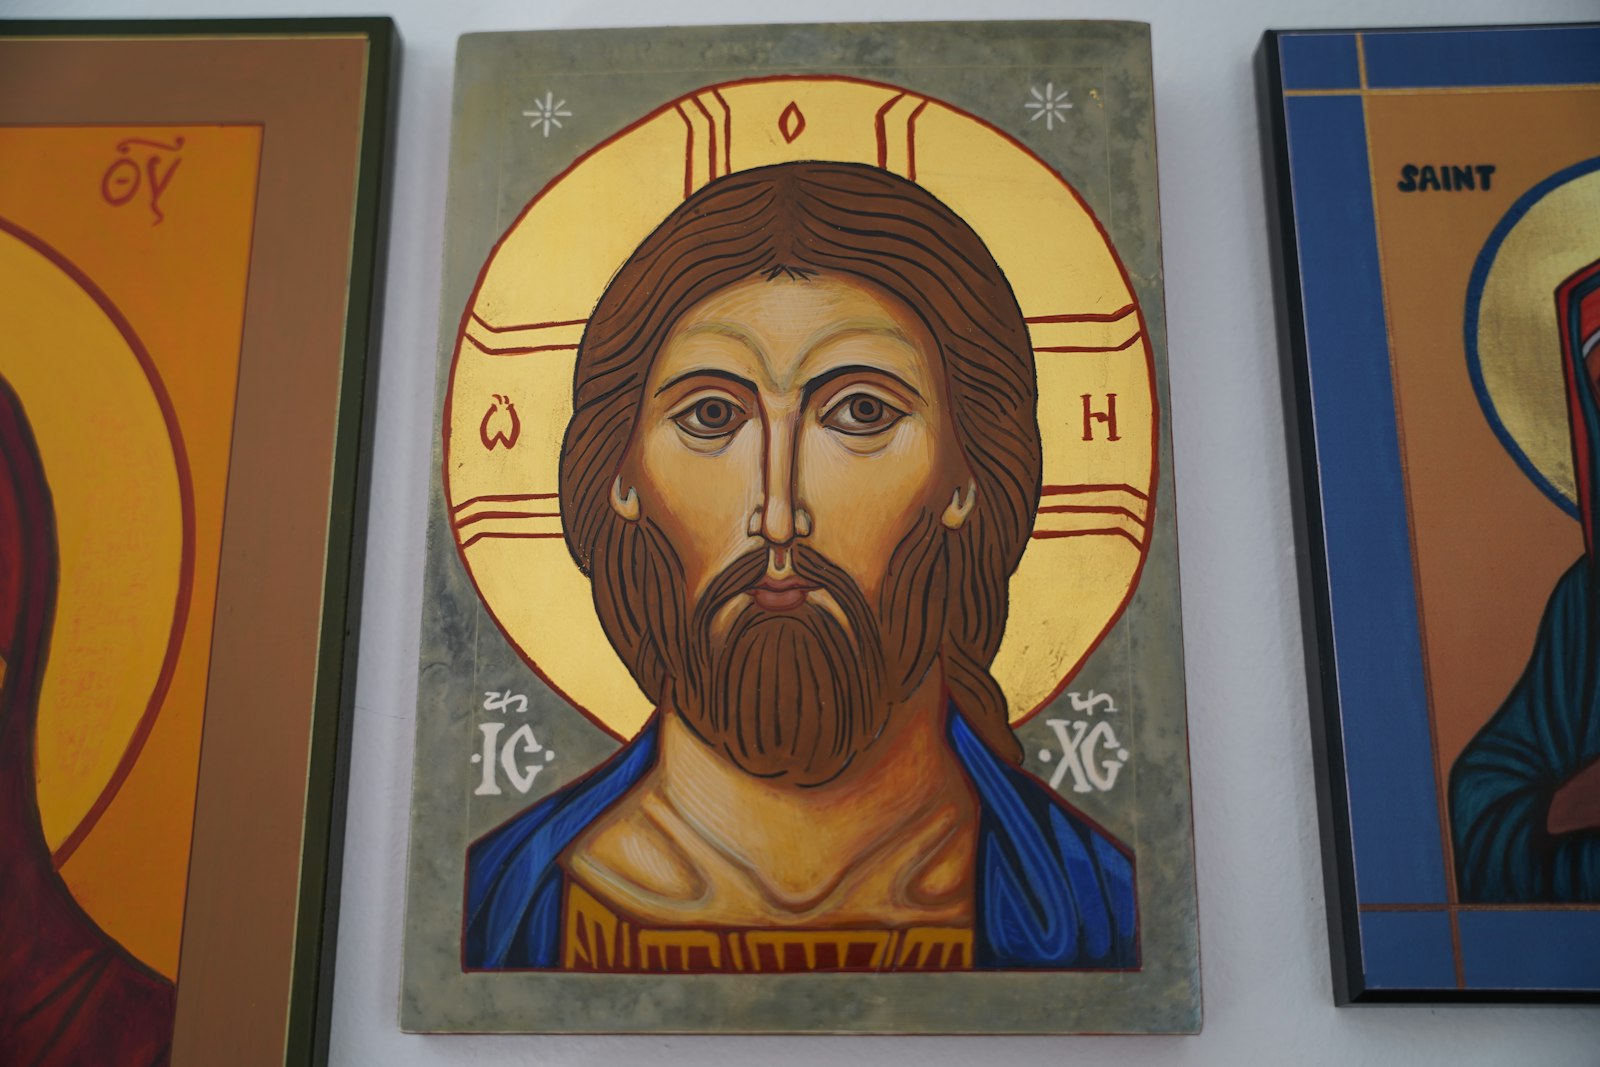 Christ is always depicted with a cruciform halo with the letters ICXC, the first and last letters of Jesus Christ in Greek.